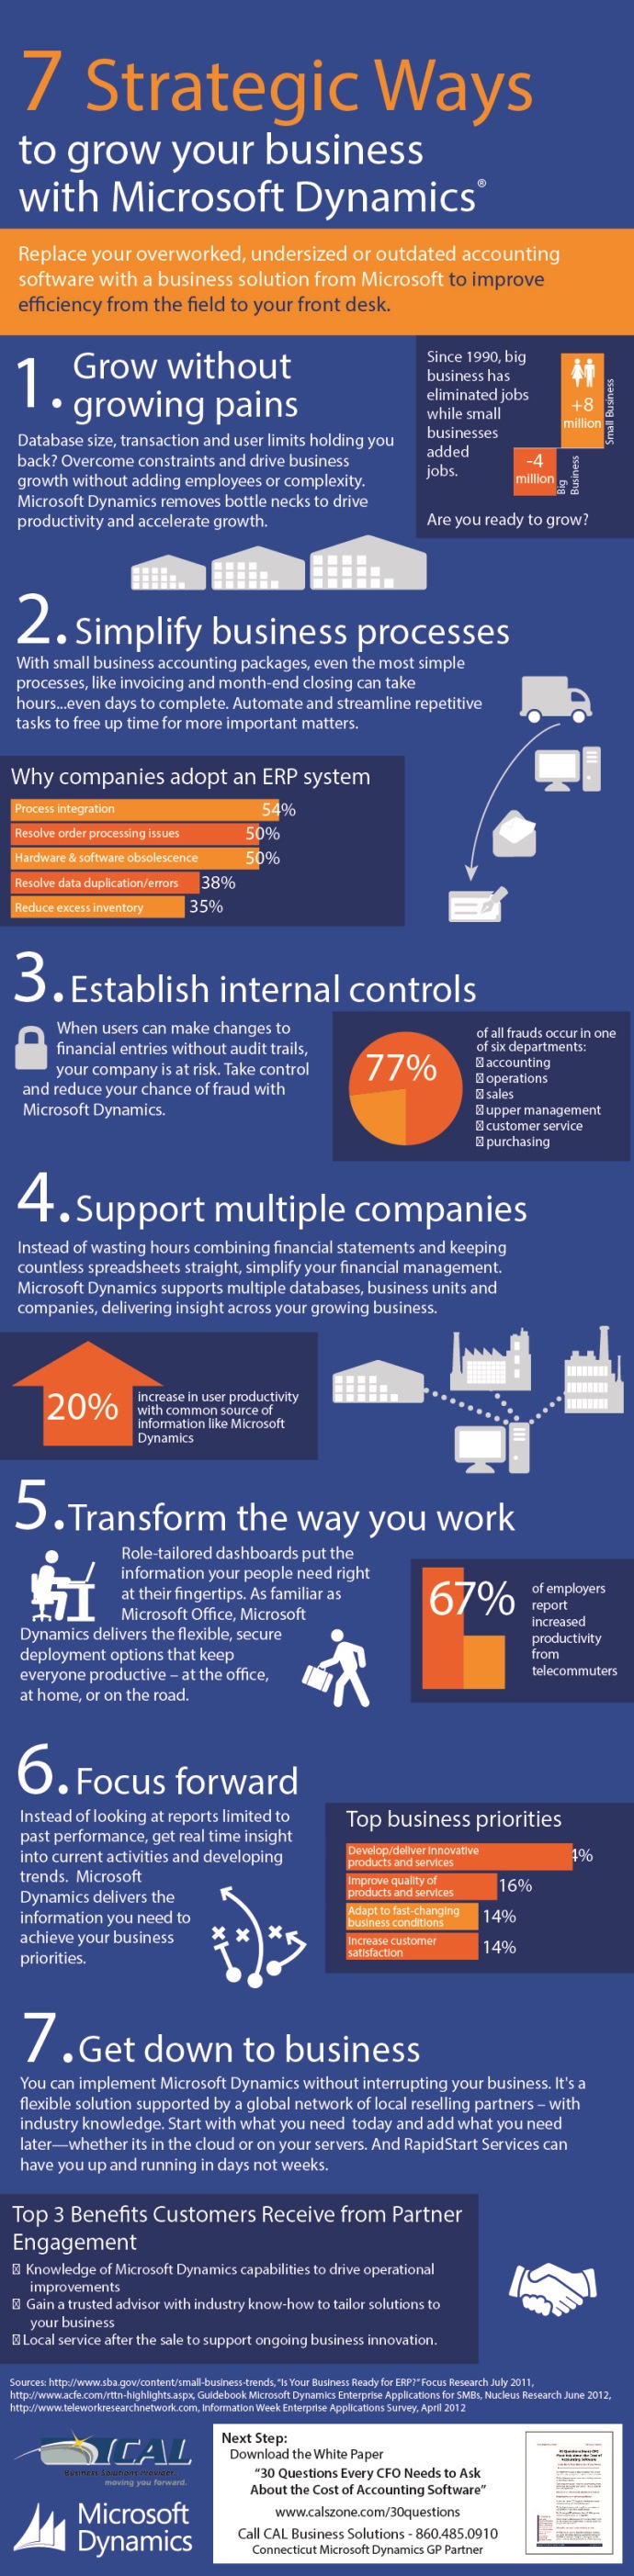 Infographic: 7 Strategic Ways to Grow Your Business with Microsoft Dynamics